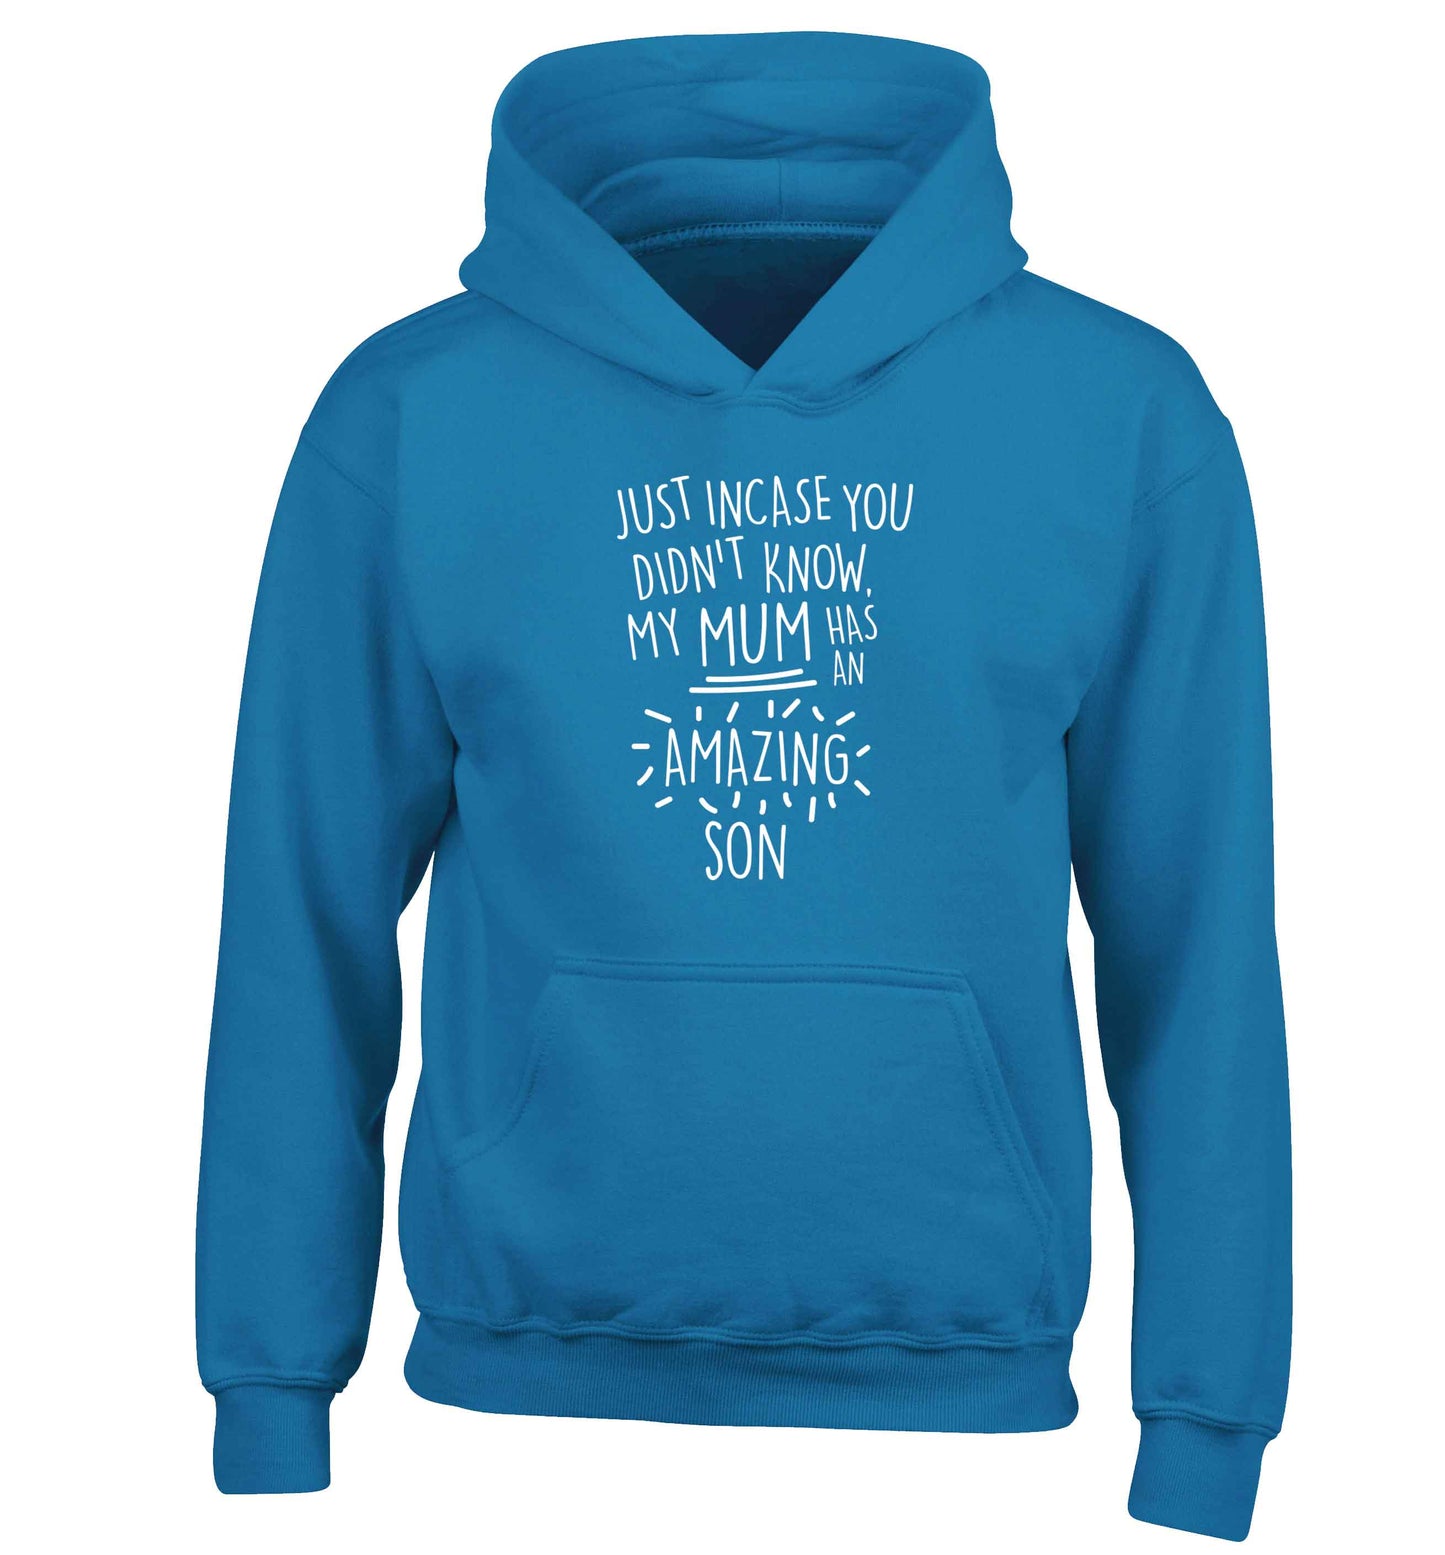 Just incase you didn't know my mum has an amazing son children's blue hoodie 12-13 Years